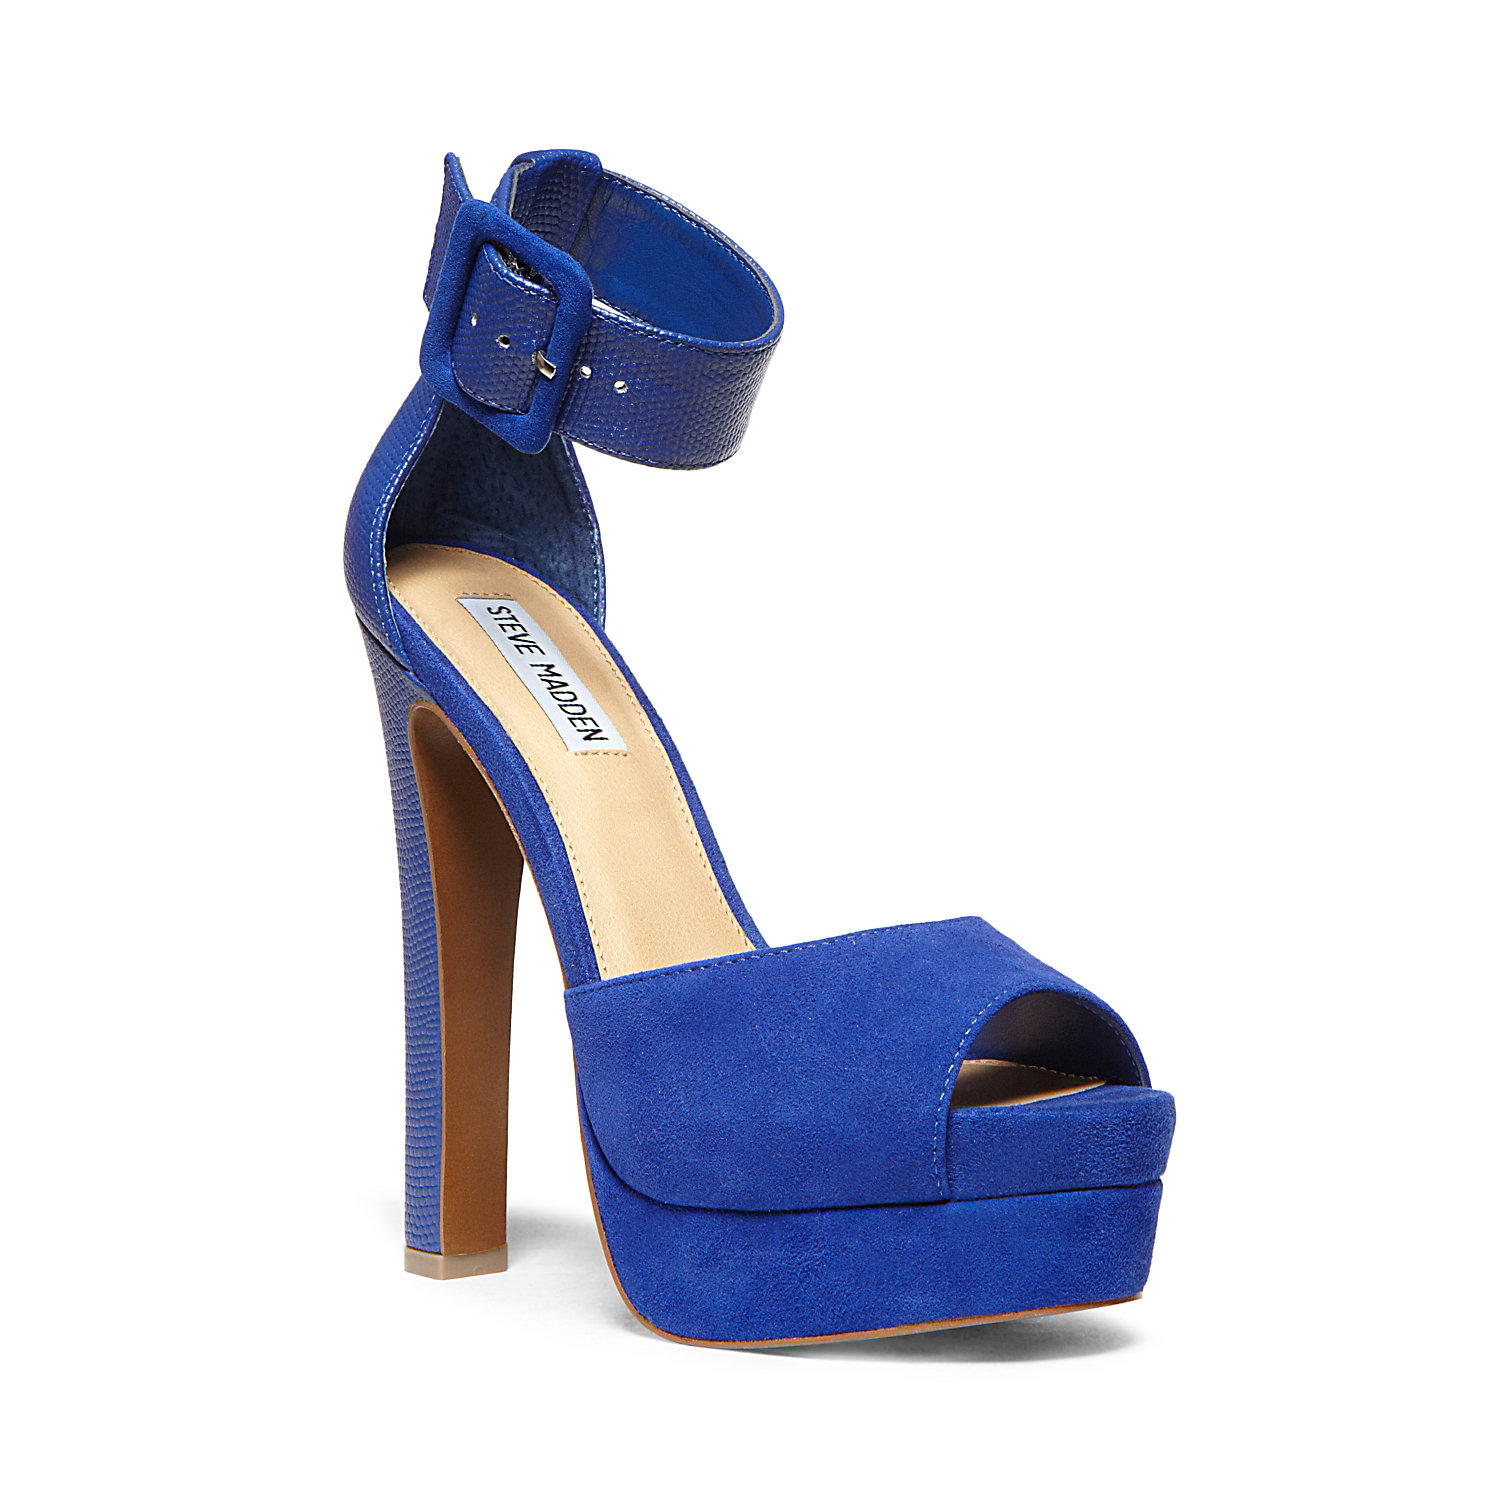 Lyst - Steve Madden Diffuse in Blue